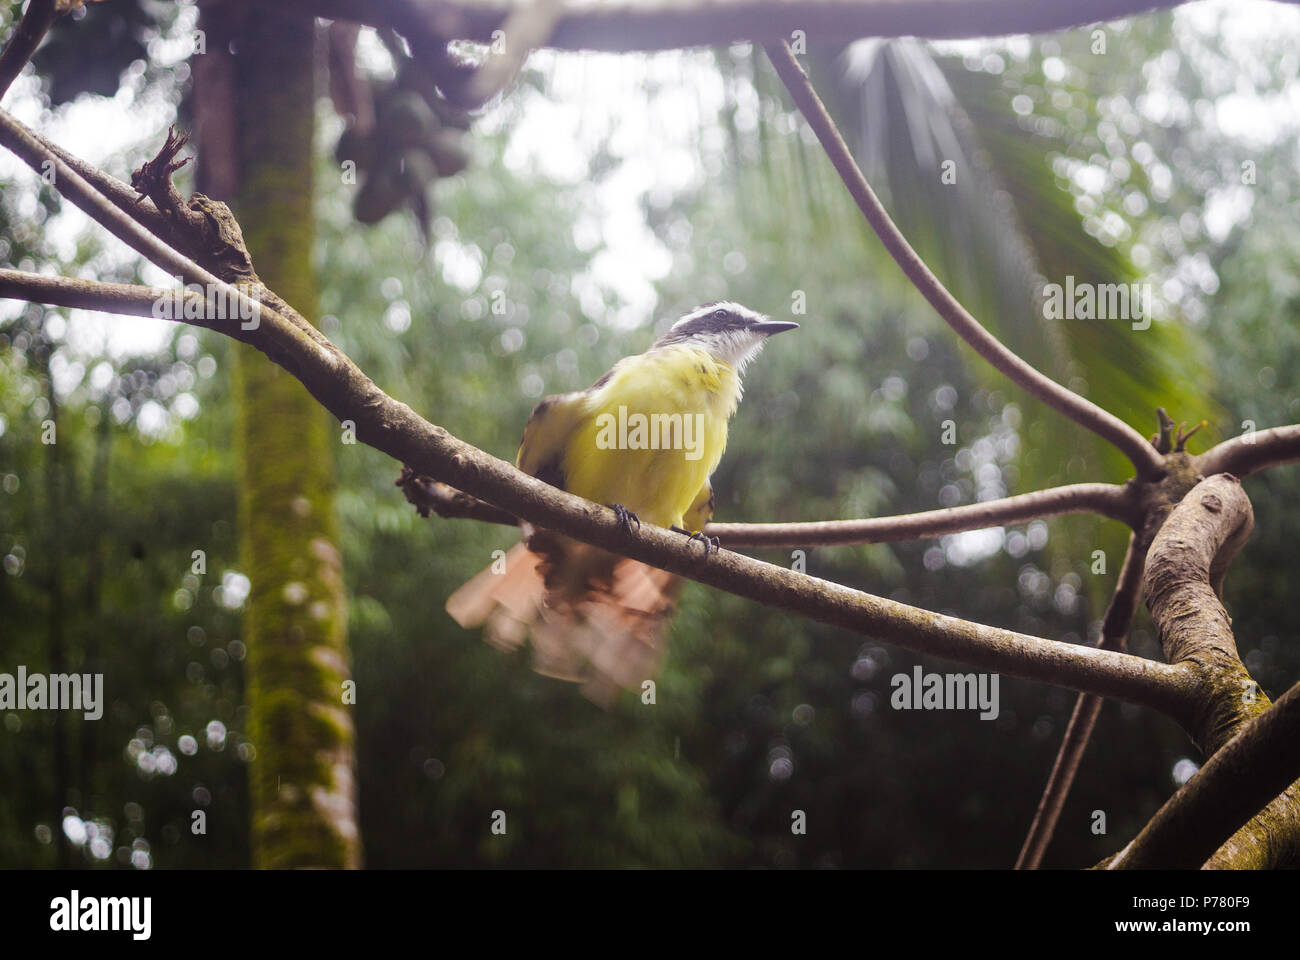 Yellow-bellied Tyrannulet flycatcher bird with black beak and yellow feathers about to fly off from a tree branch in the forest of Costa Rica Stock Photo